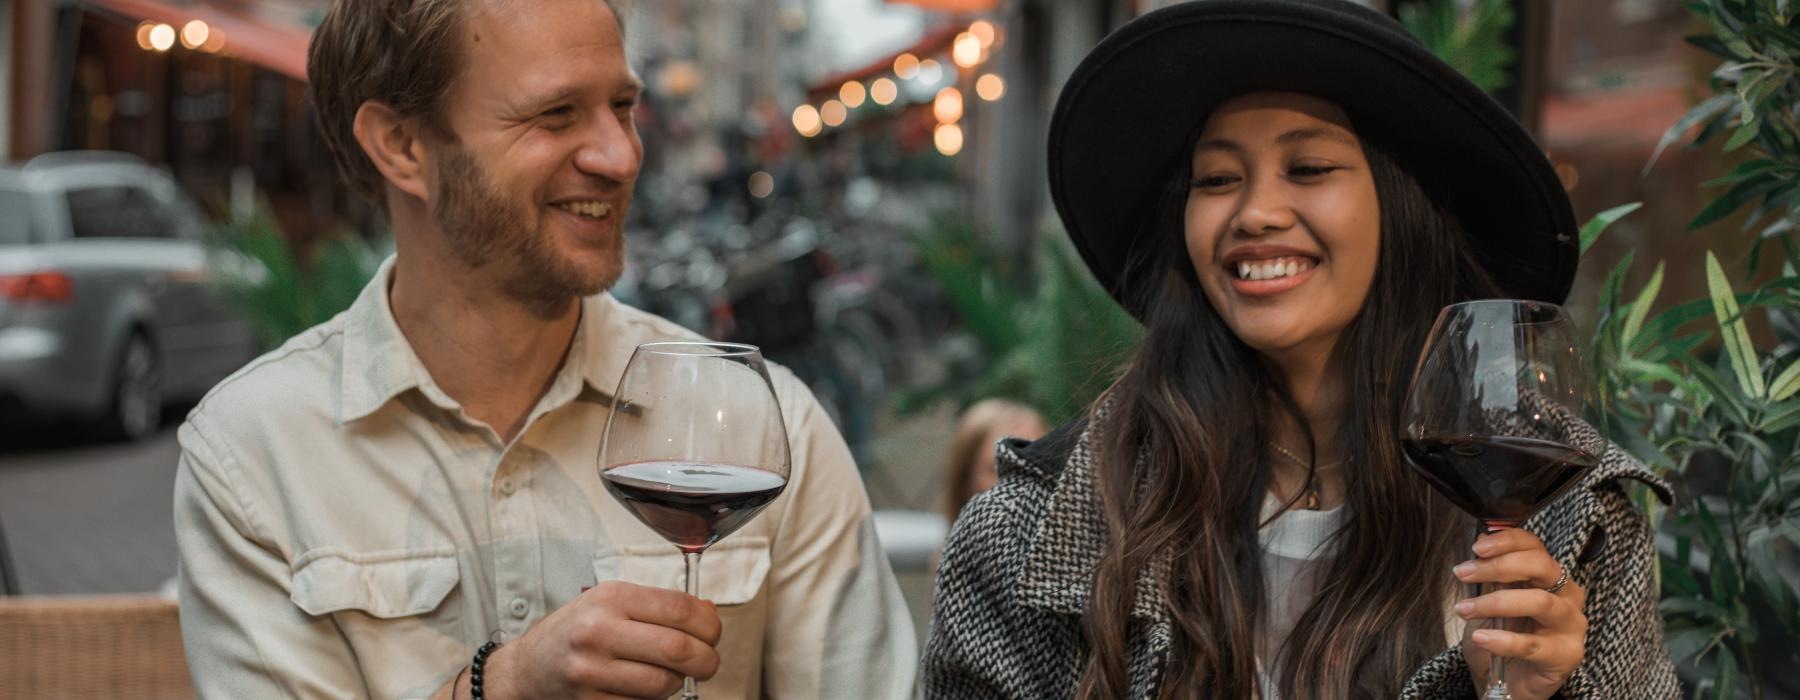 a man and a woman holding wine glasses and smiling